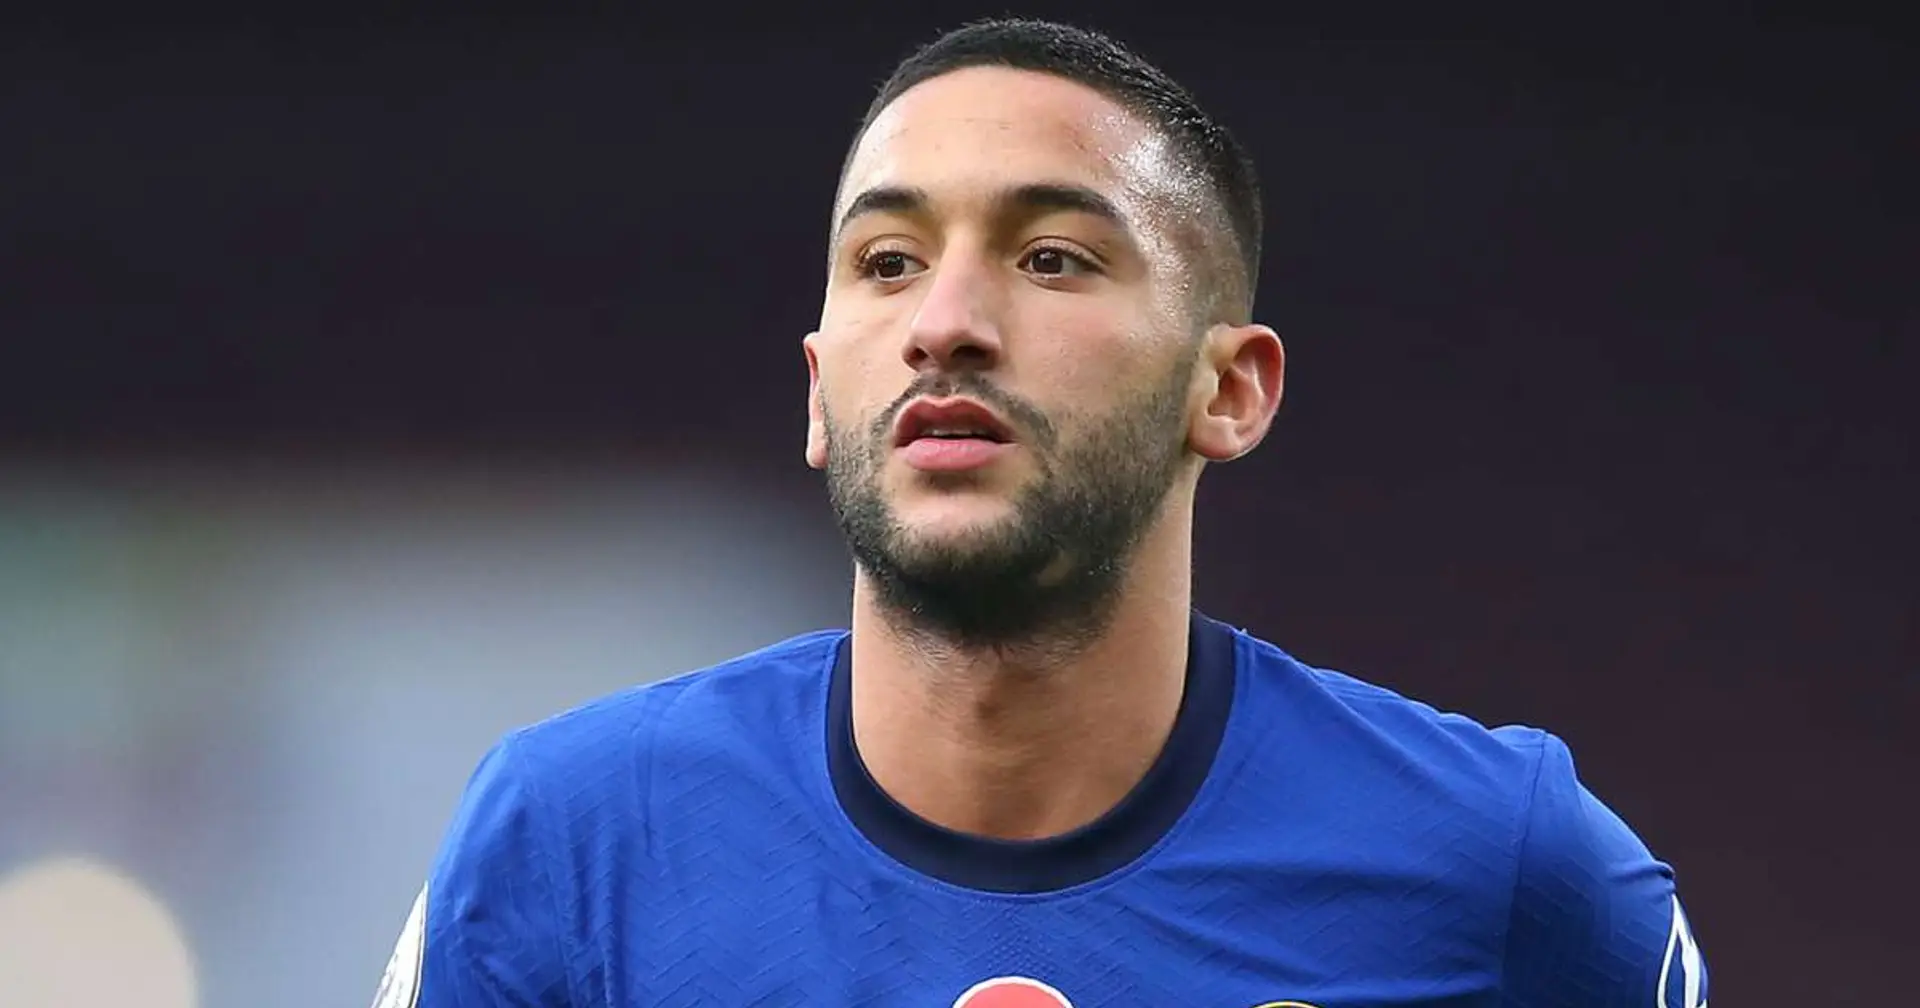 AC Milan reportedly continue pursuing interest in Hakim Ziyech (reliability: 4 stars)